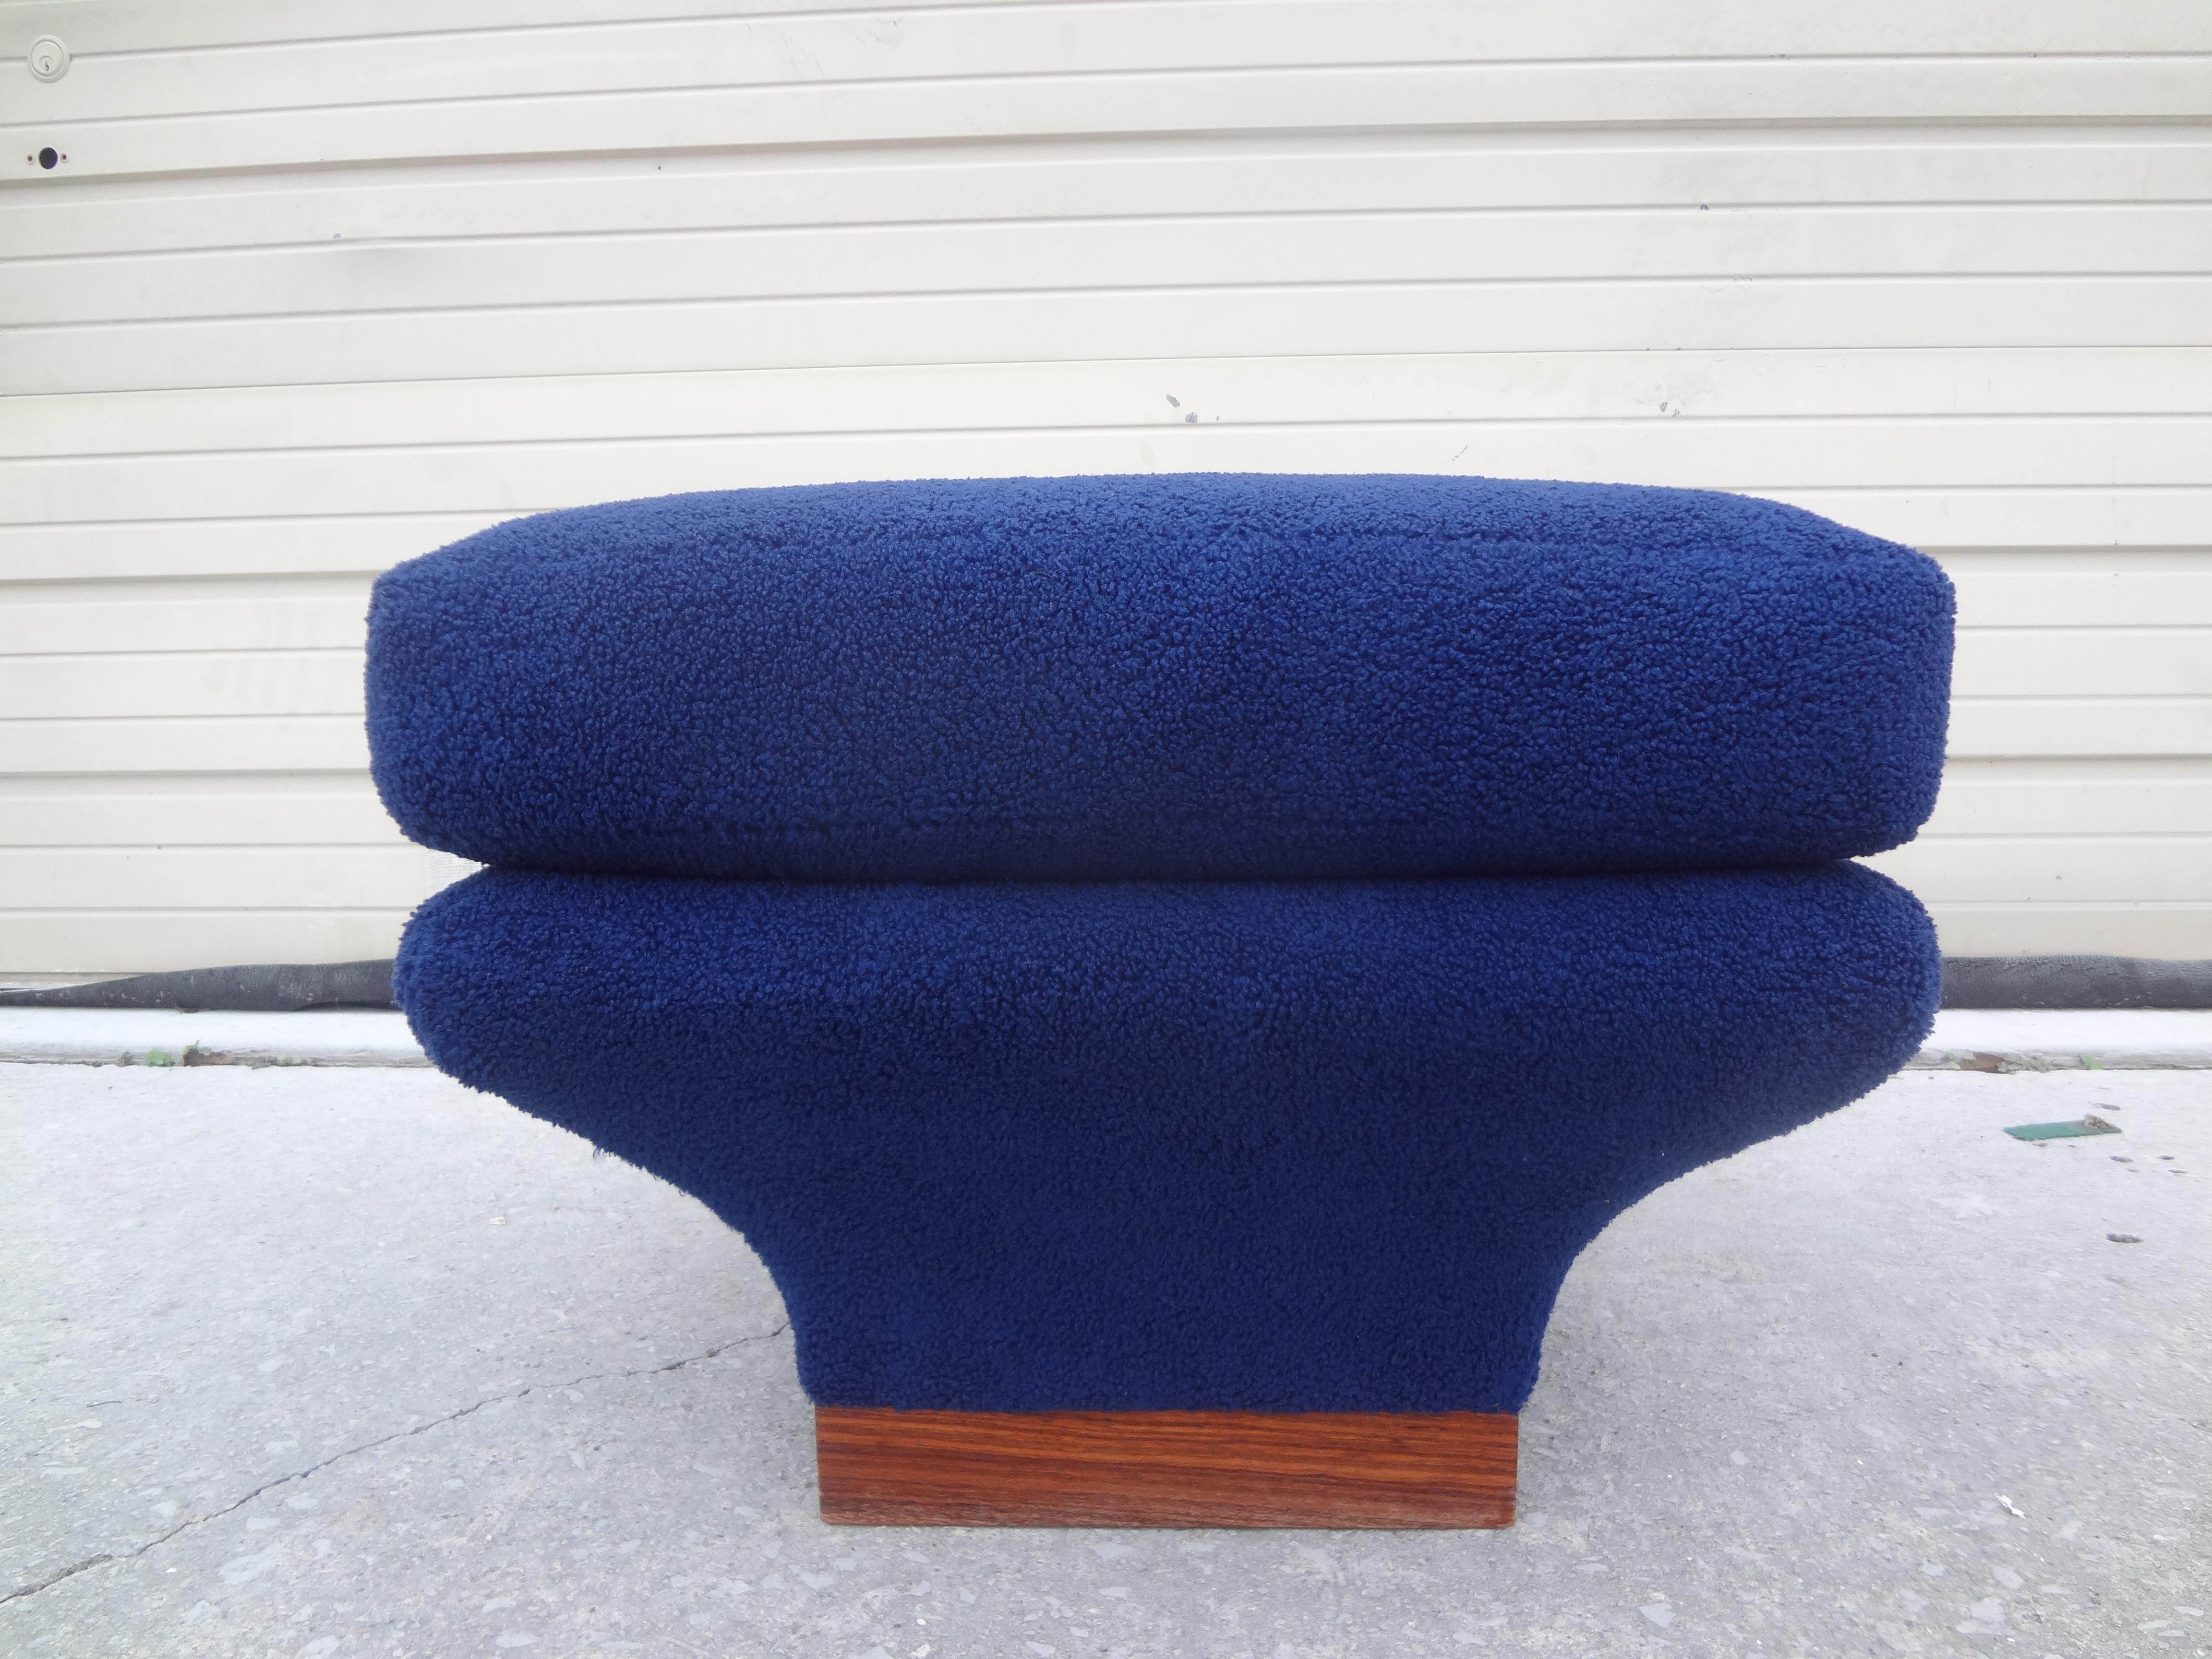 French Mid-Century Modern Ottoman Or Bench Attributed To Pierre Paulin.
Unusual French modern ottoman, pouf, stool or bench with a walnut base upholstered in plush blue boucle fabric. This handsome pouf has a semi-attached top cushion and is both